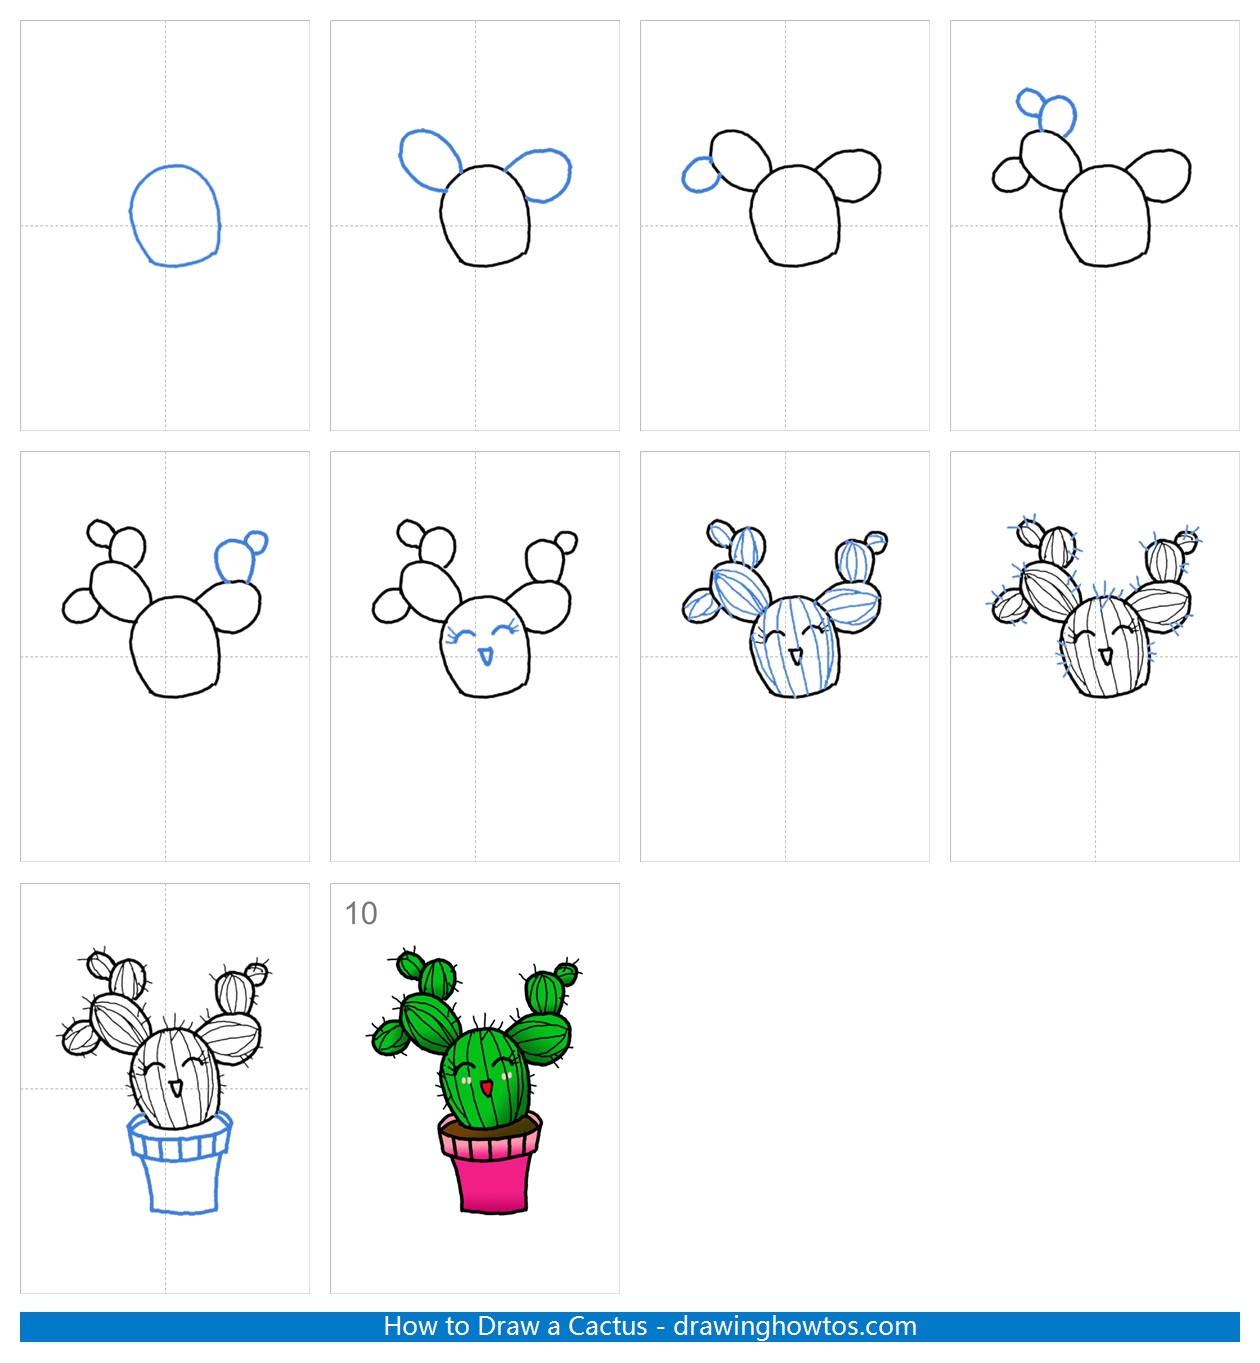 How to Draw a Cute Cactus Step by Step